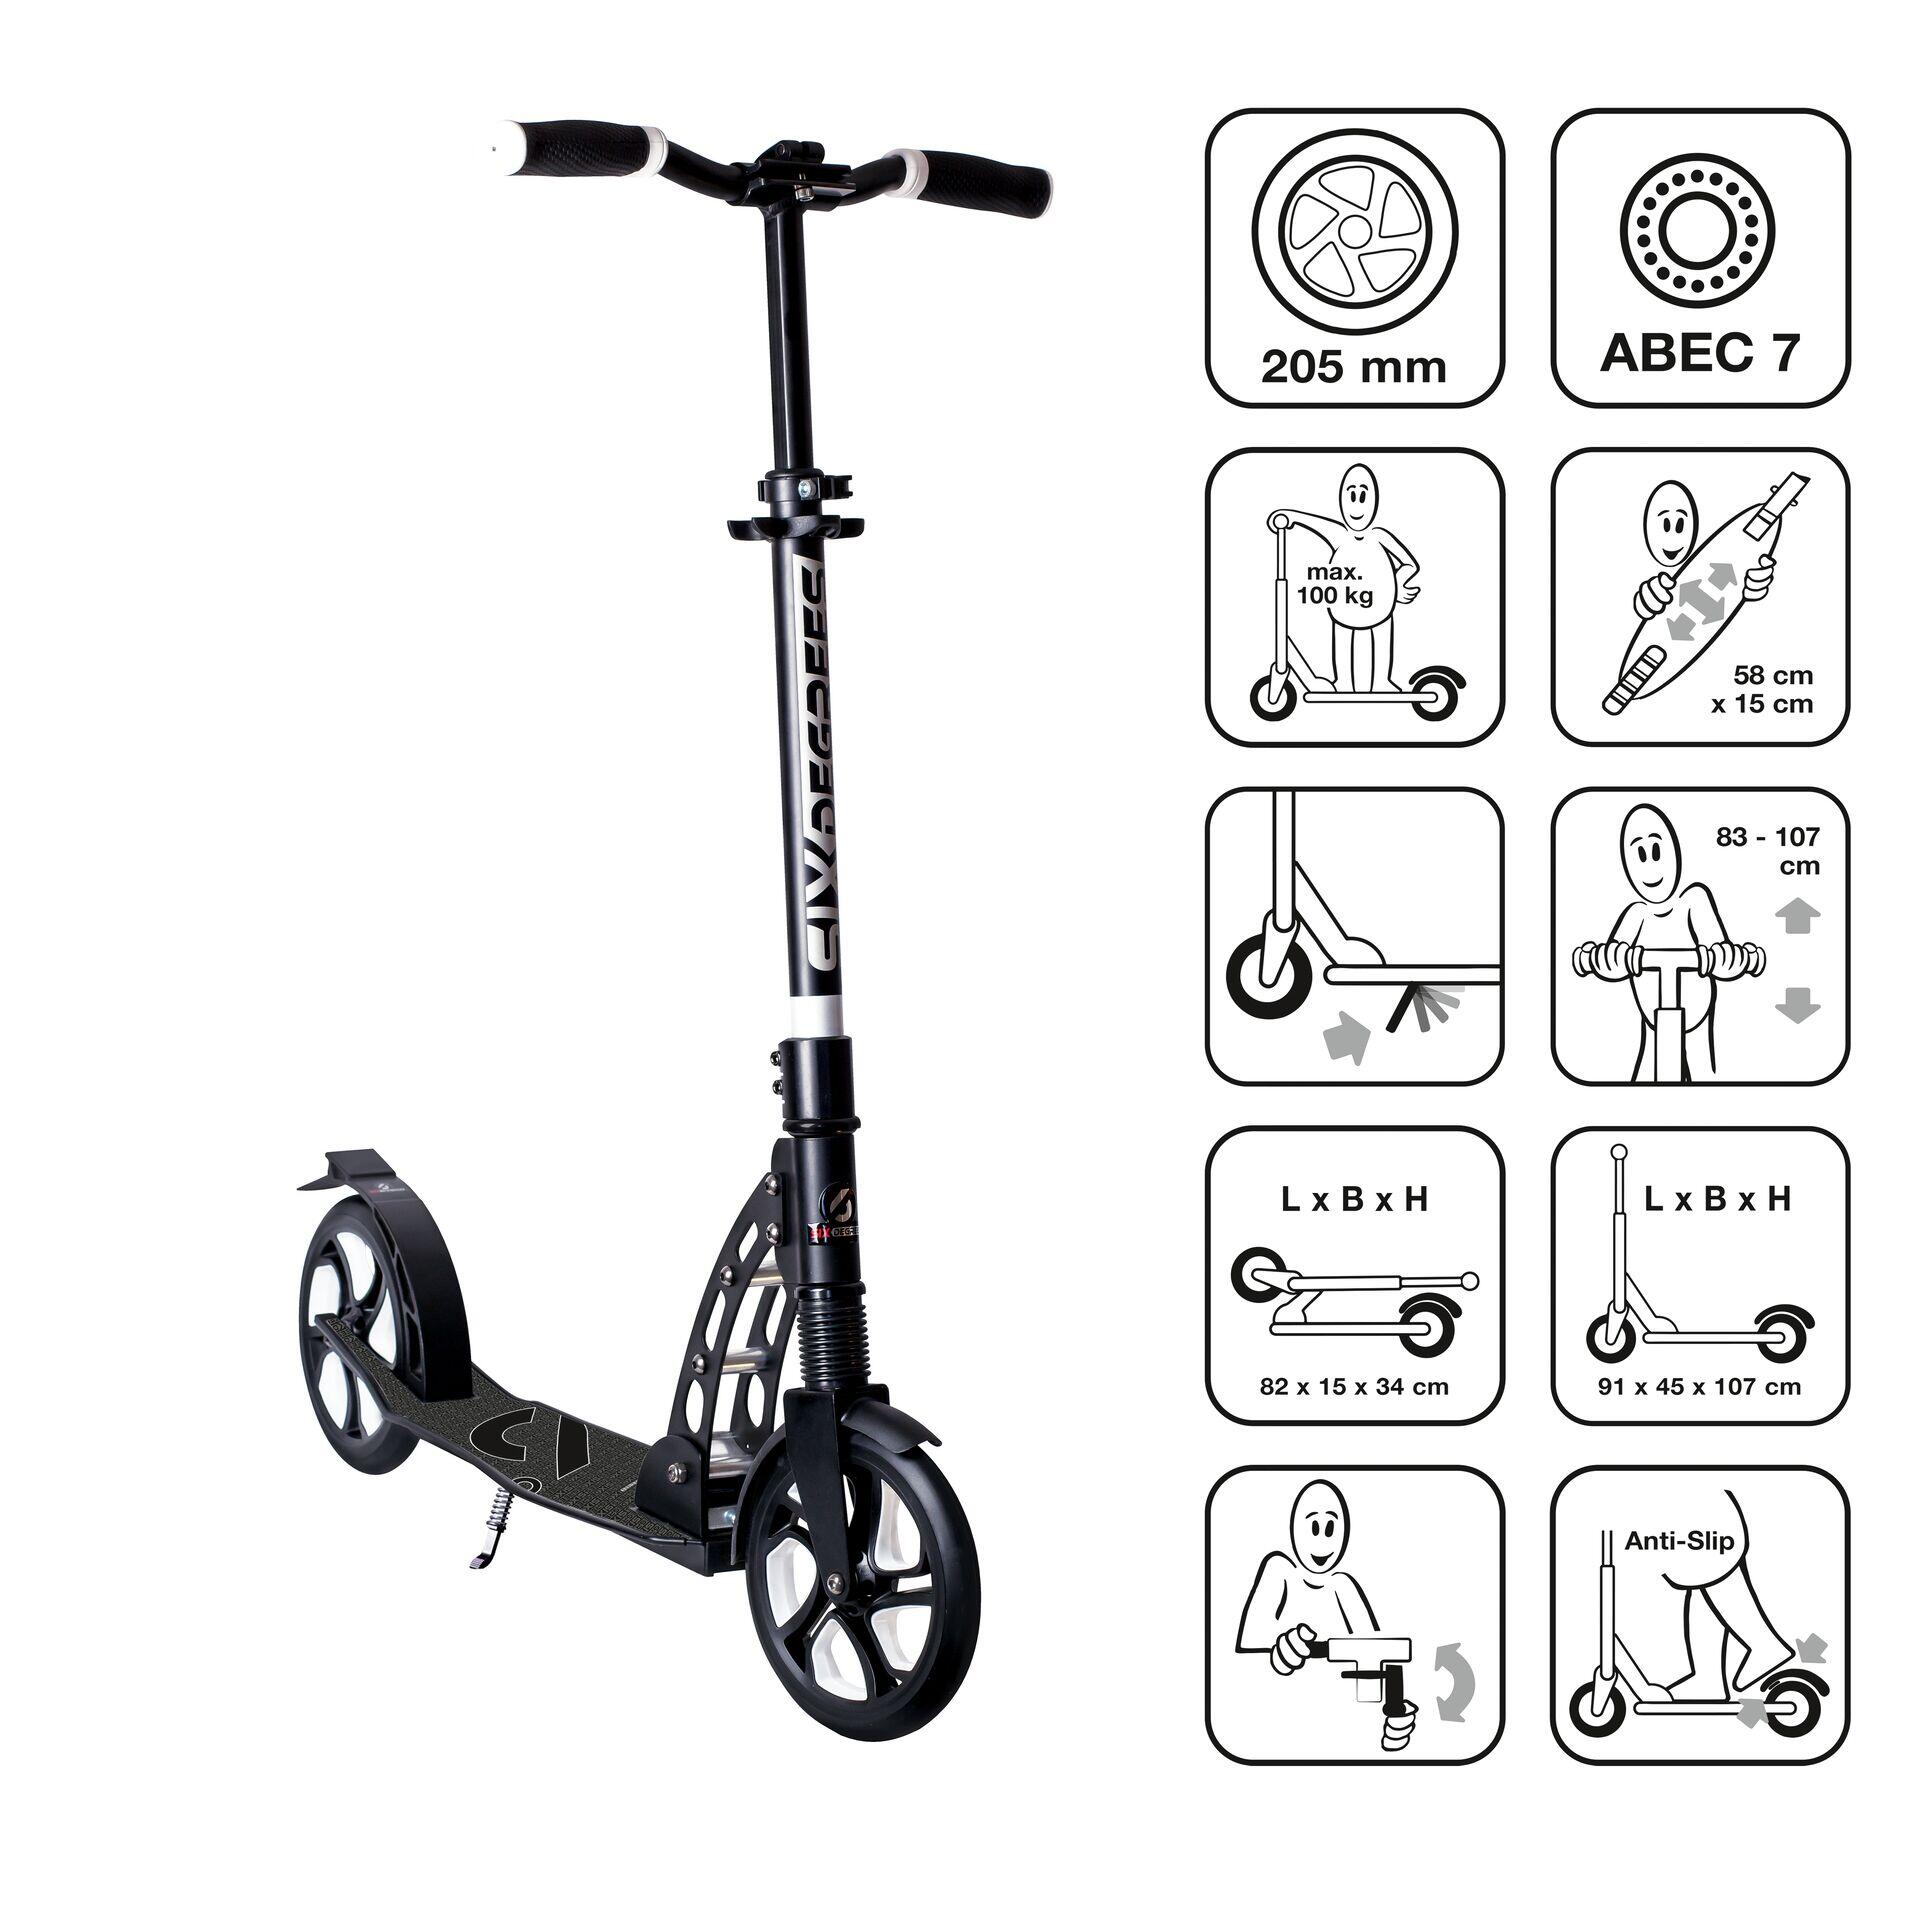 SIX DEGREES Kick Scooter with Suspension 205mm black 1/5